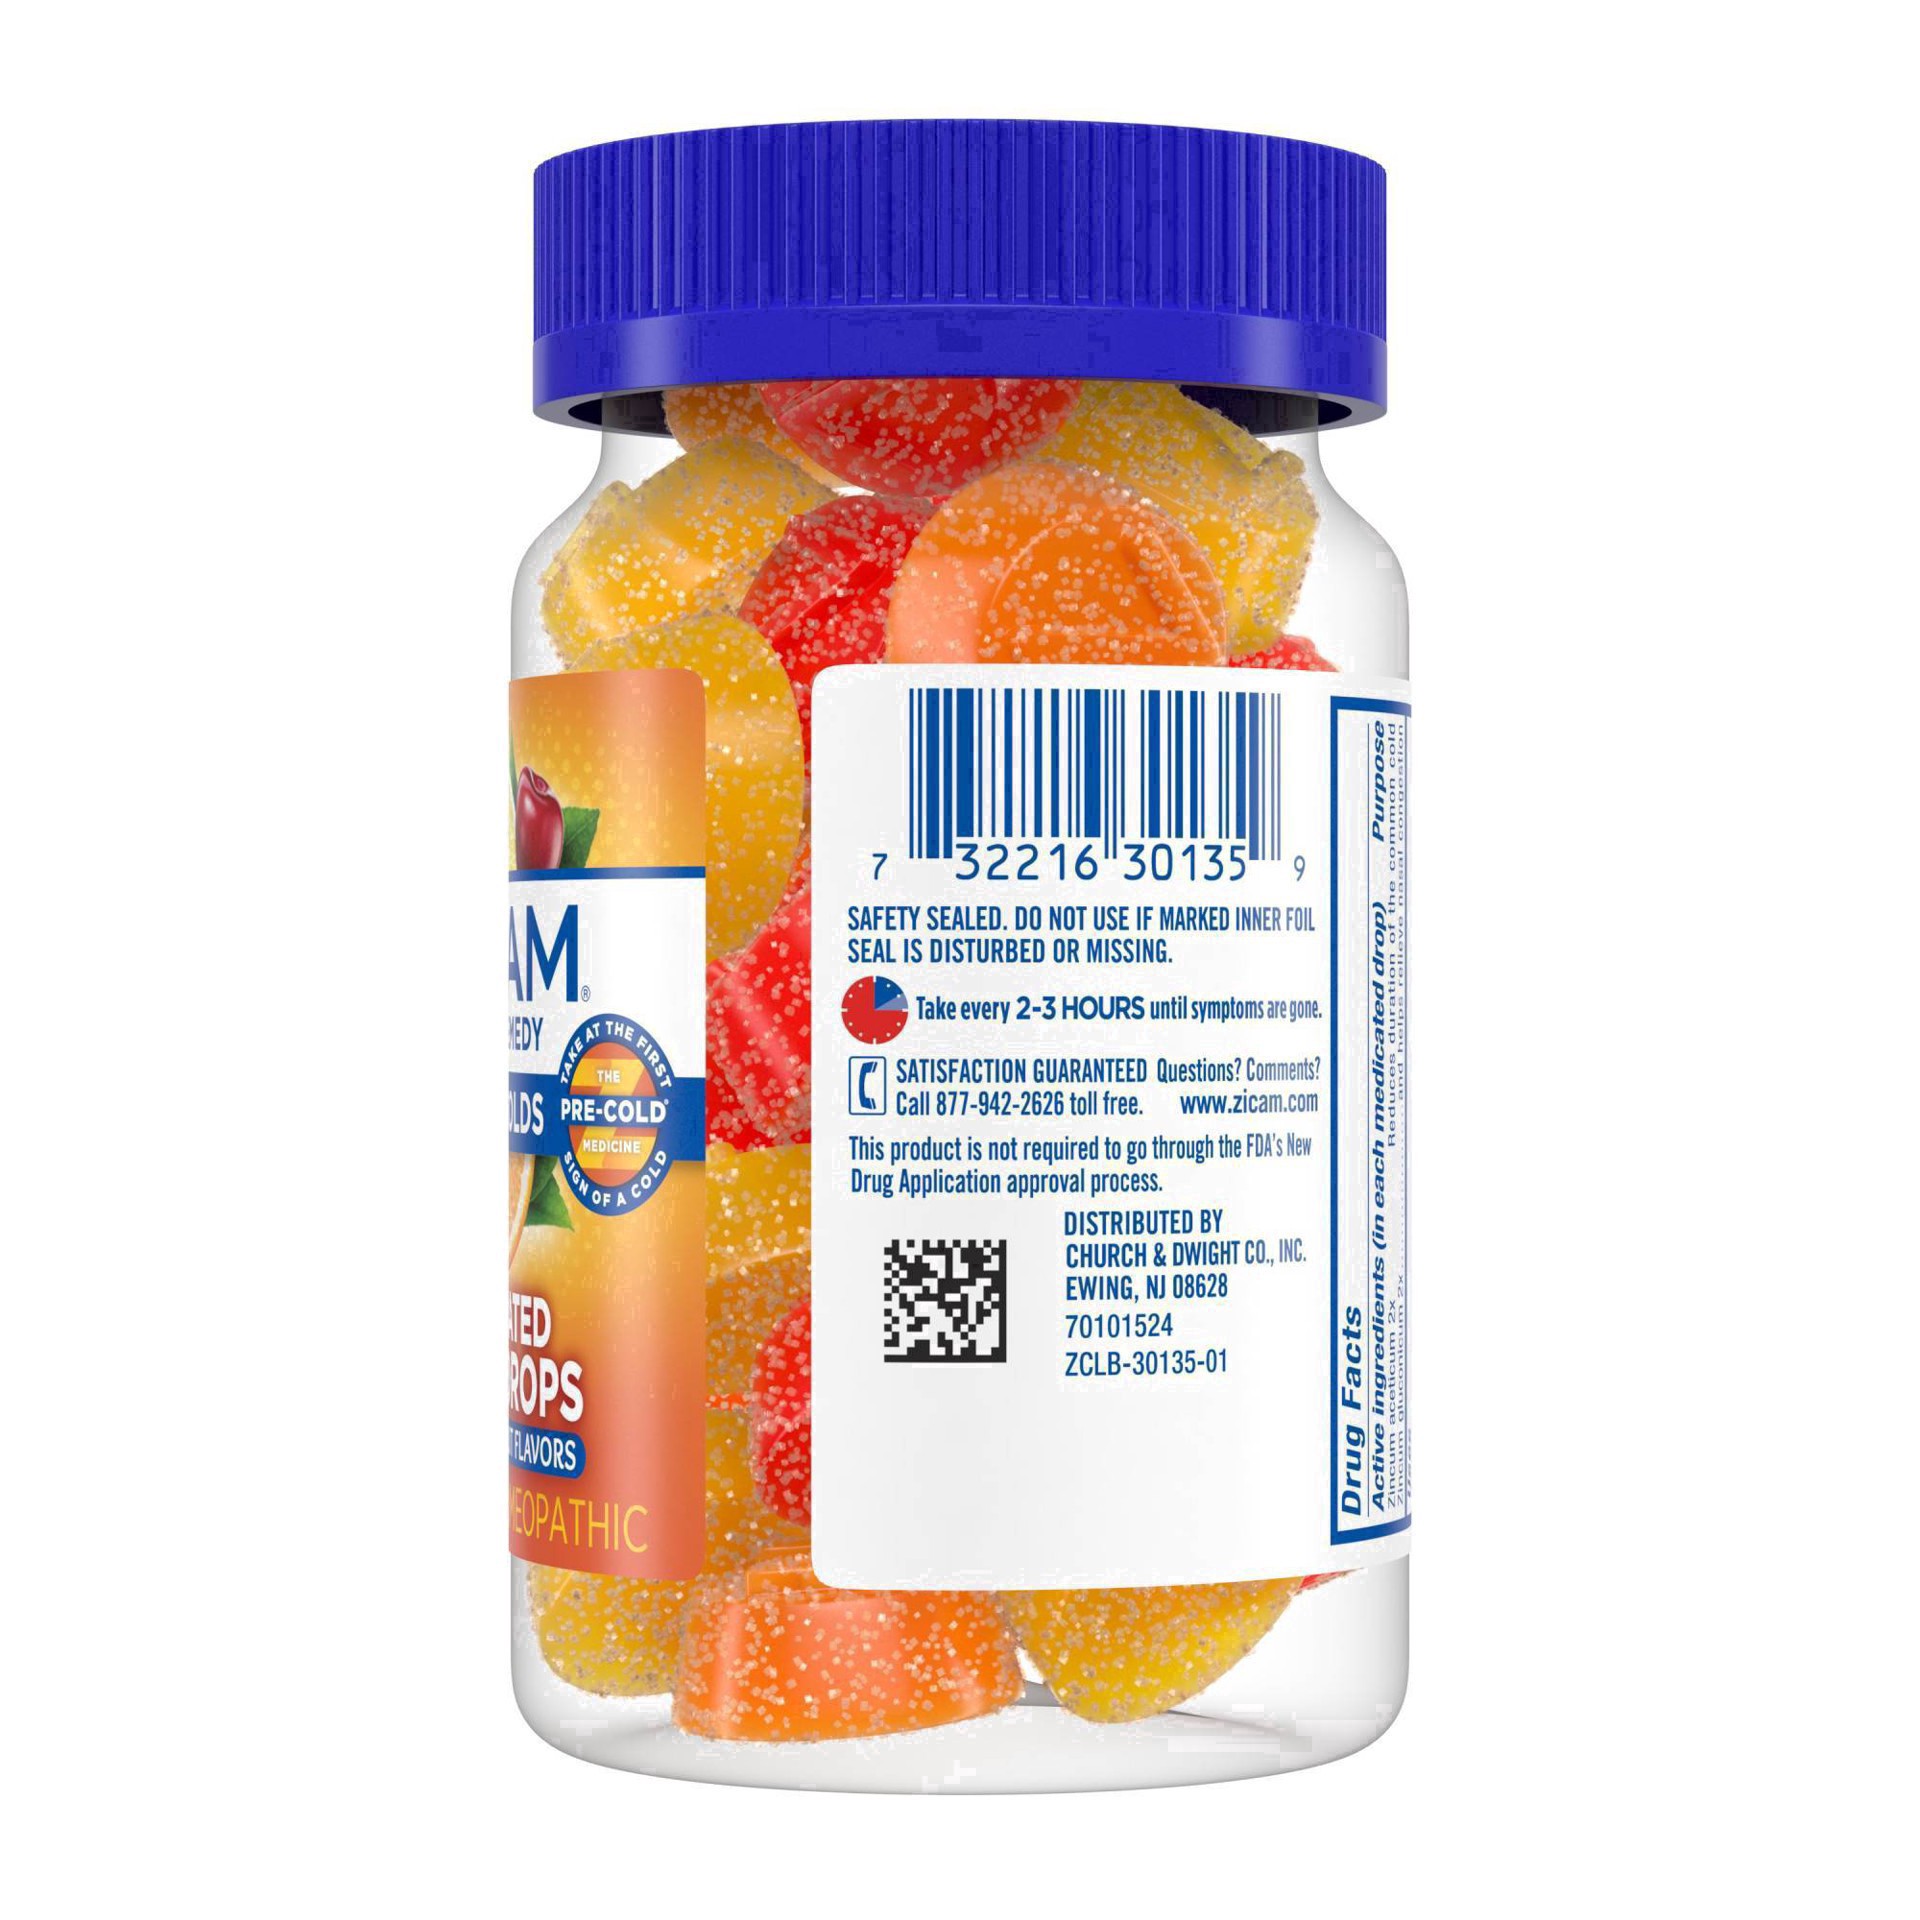 slide 23 of 58, Zicam Cold Remedy Medicated Drops - Fruit - 25ct, 25 ct